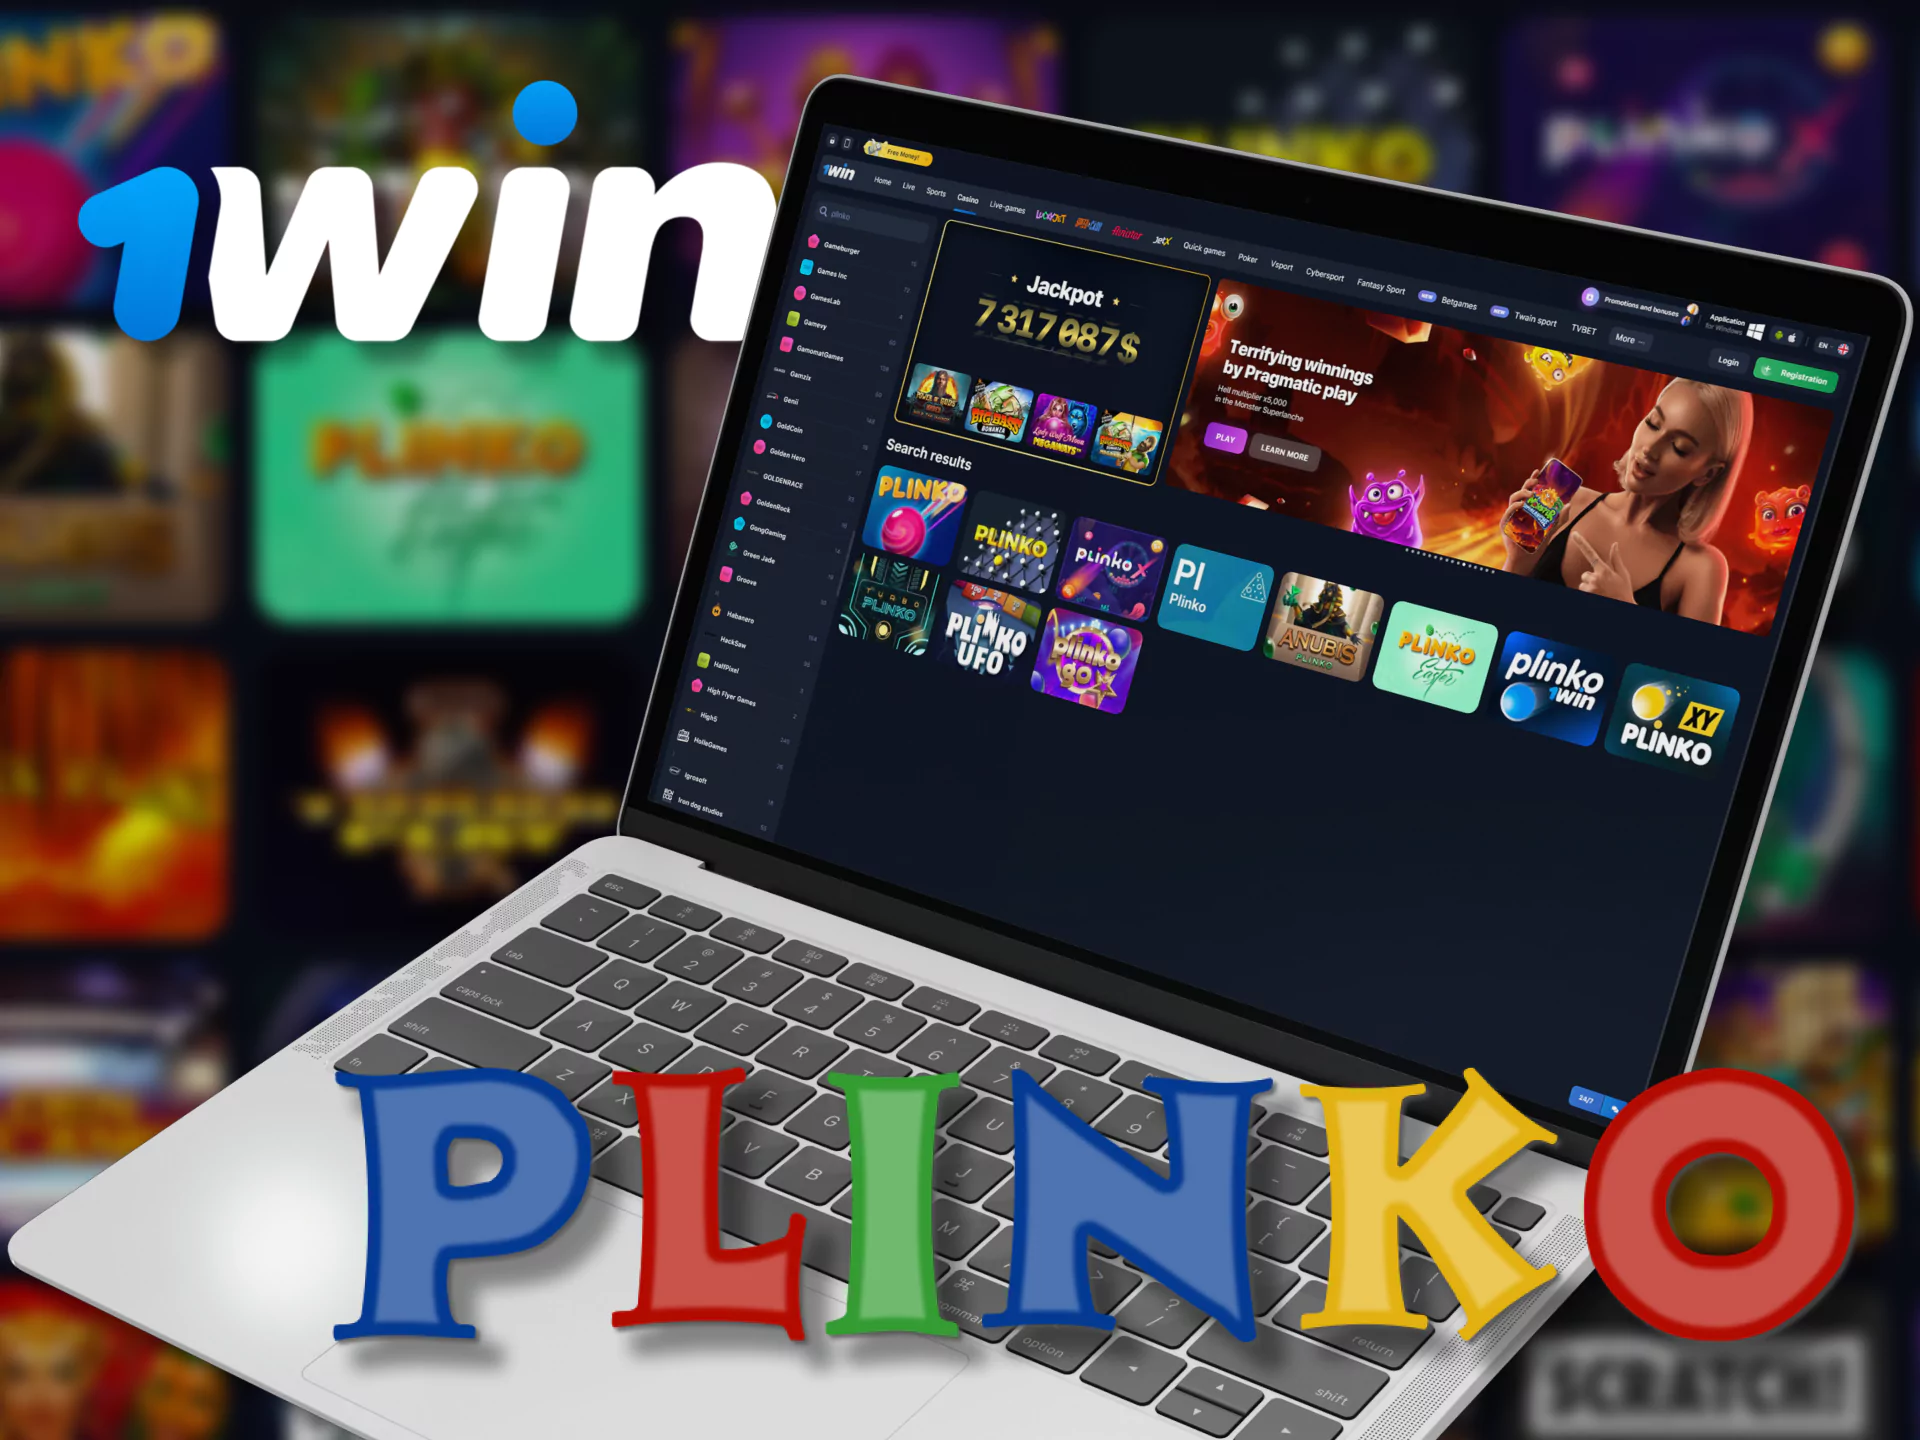 Before playing plinko on 1Win, get to know the rules.